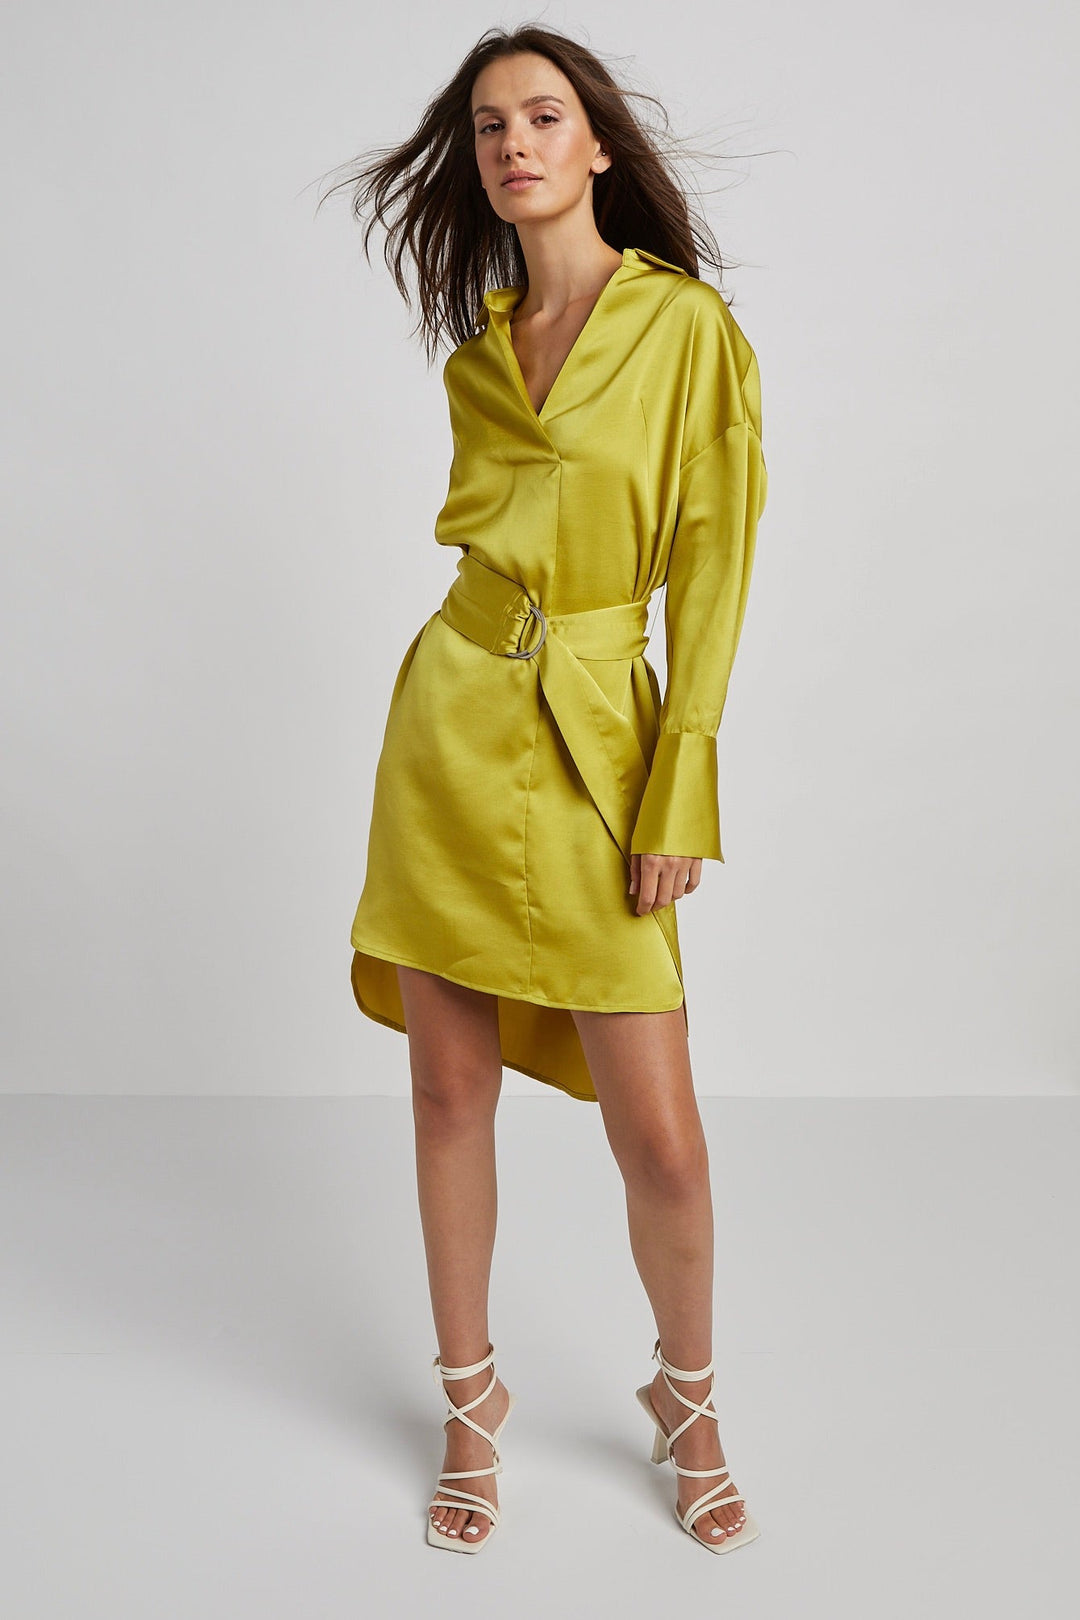 Adroit Atelier Chartreuse Kyoko Pullover Dress